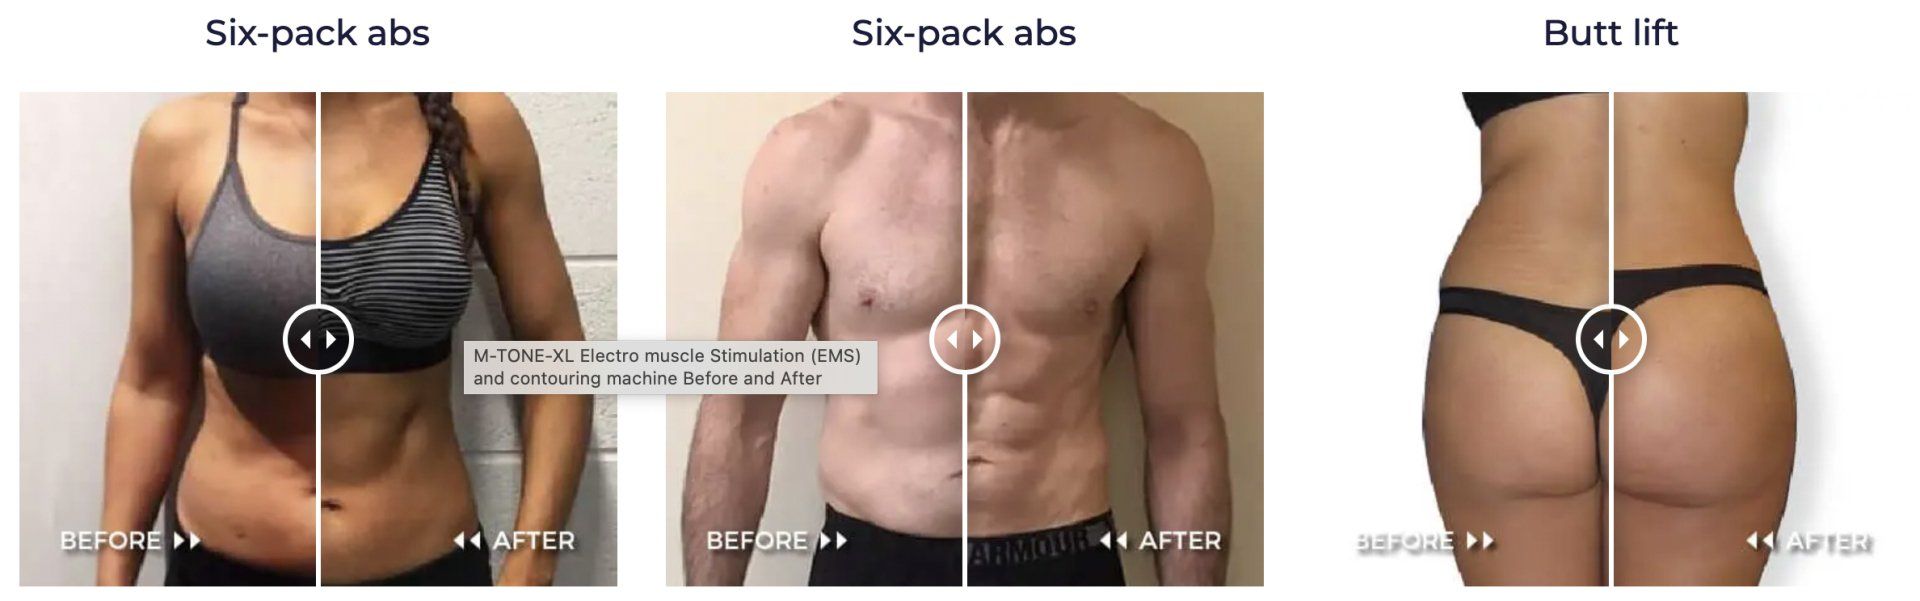 a before and after photos of a woman 's six pack abs and a man 's six pack abs